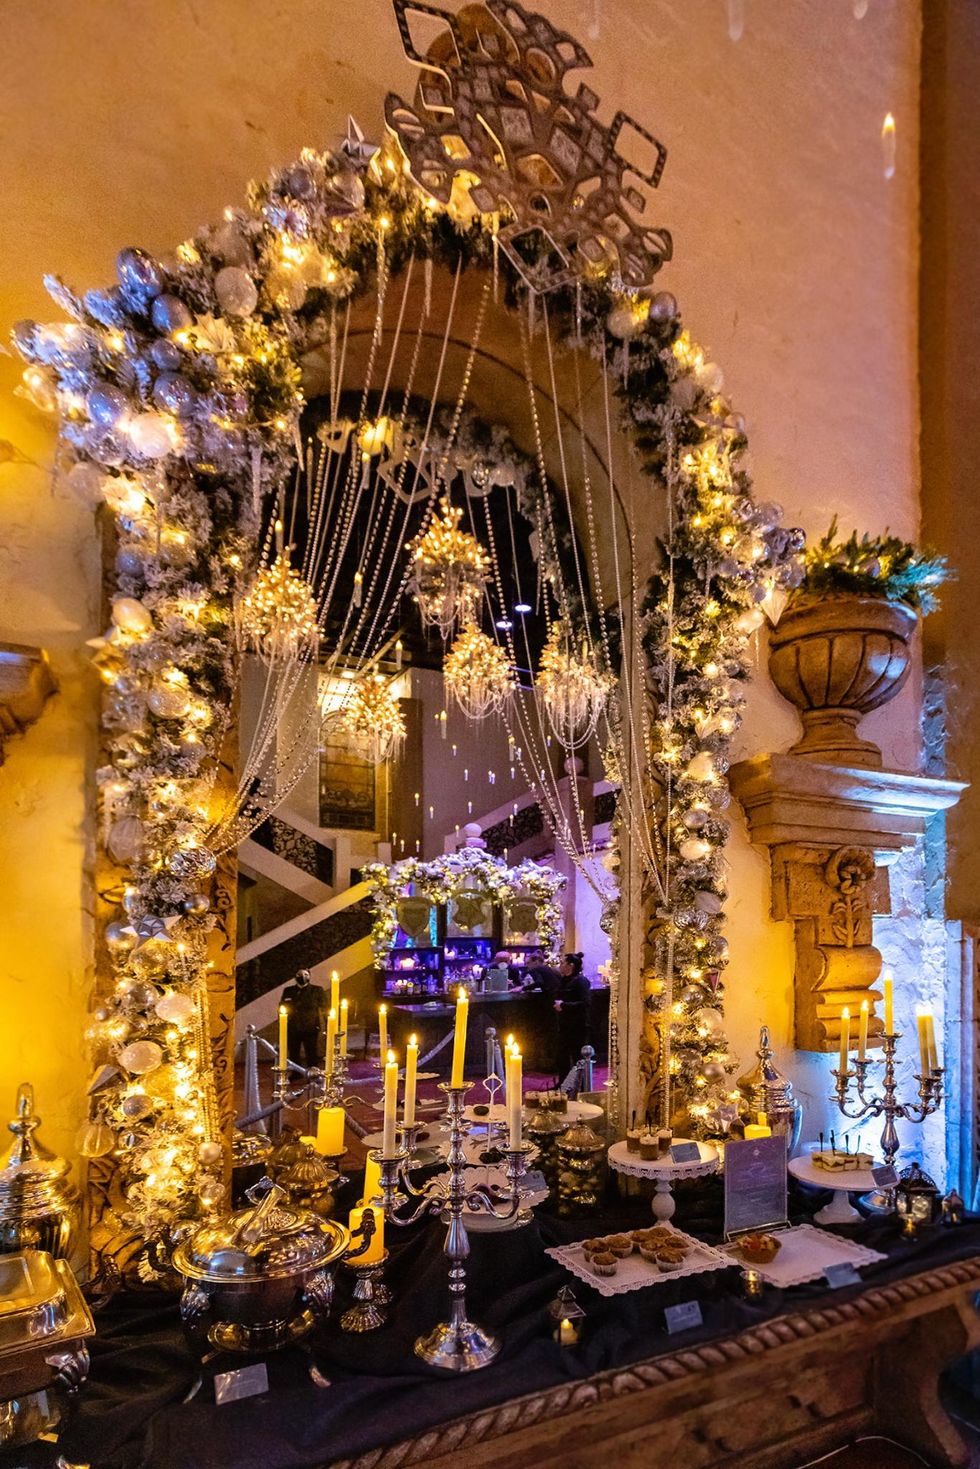 Inside the magical Harry Potter Yule Ball now casting a spell